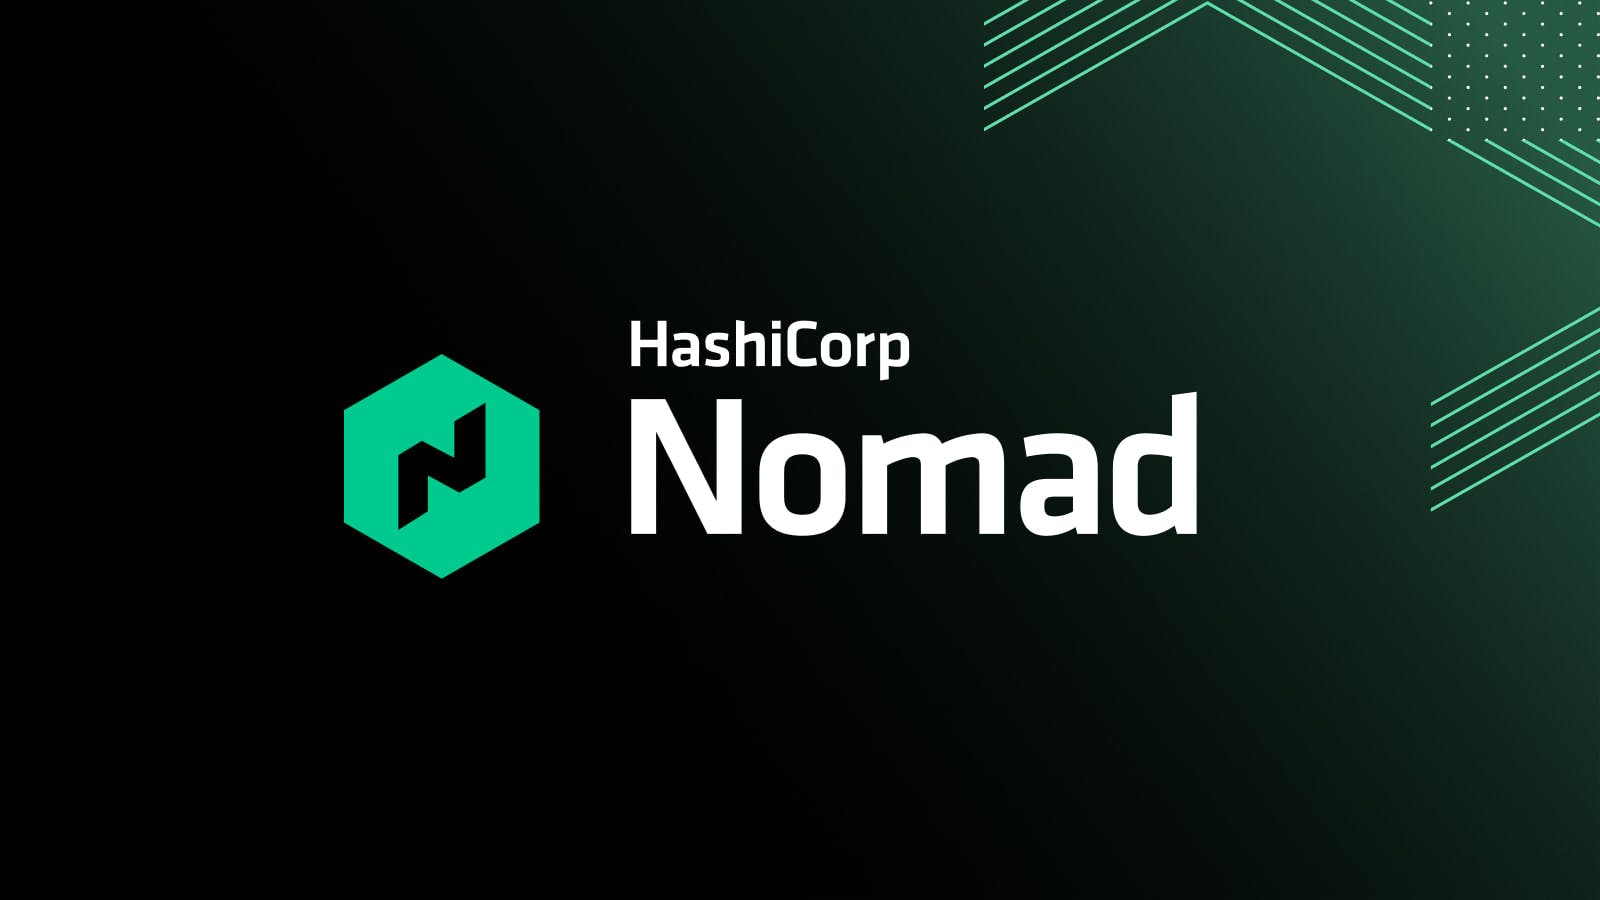 Running Duplicate Batch Jobs in HashiCorp Nomad